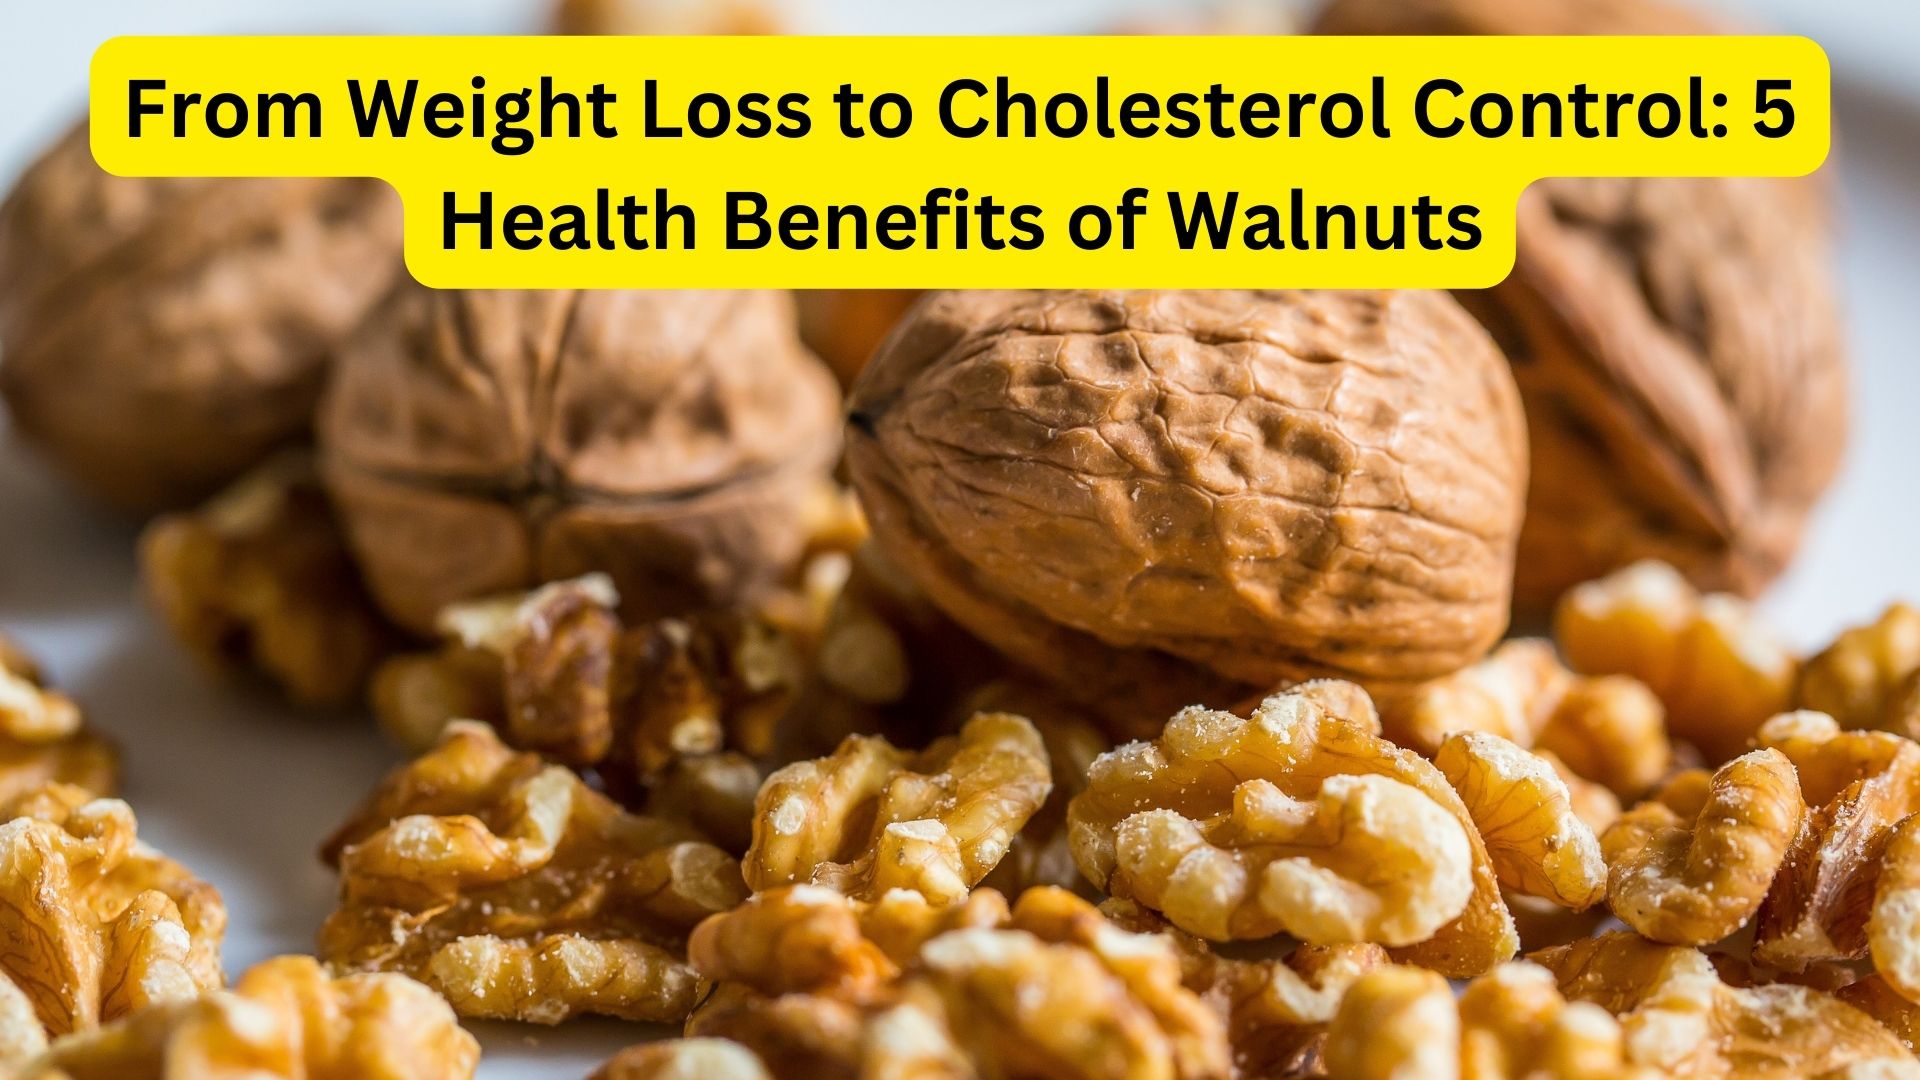 From Weight Loss to Cholesterol Control: 5 Health Benefits of Walnuts